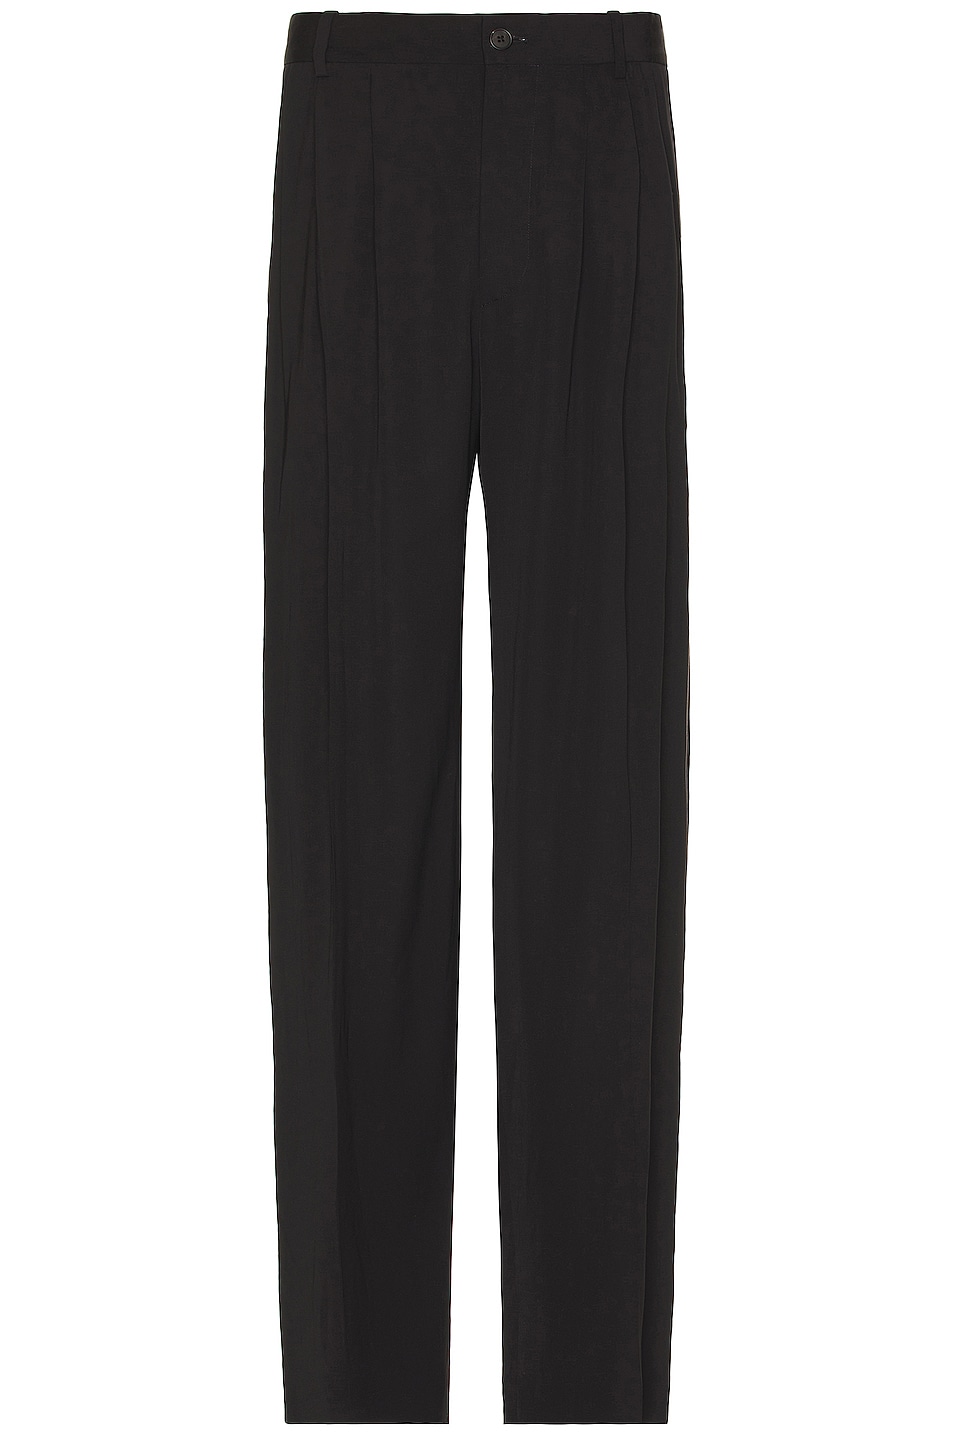 Image 1 of The Row Rufus Pants in Black